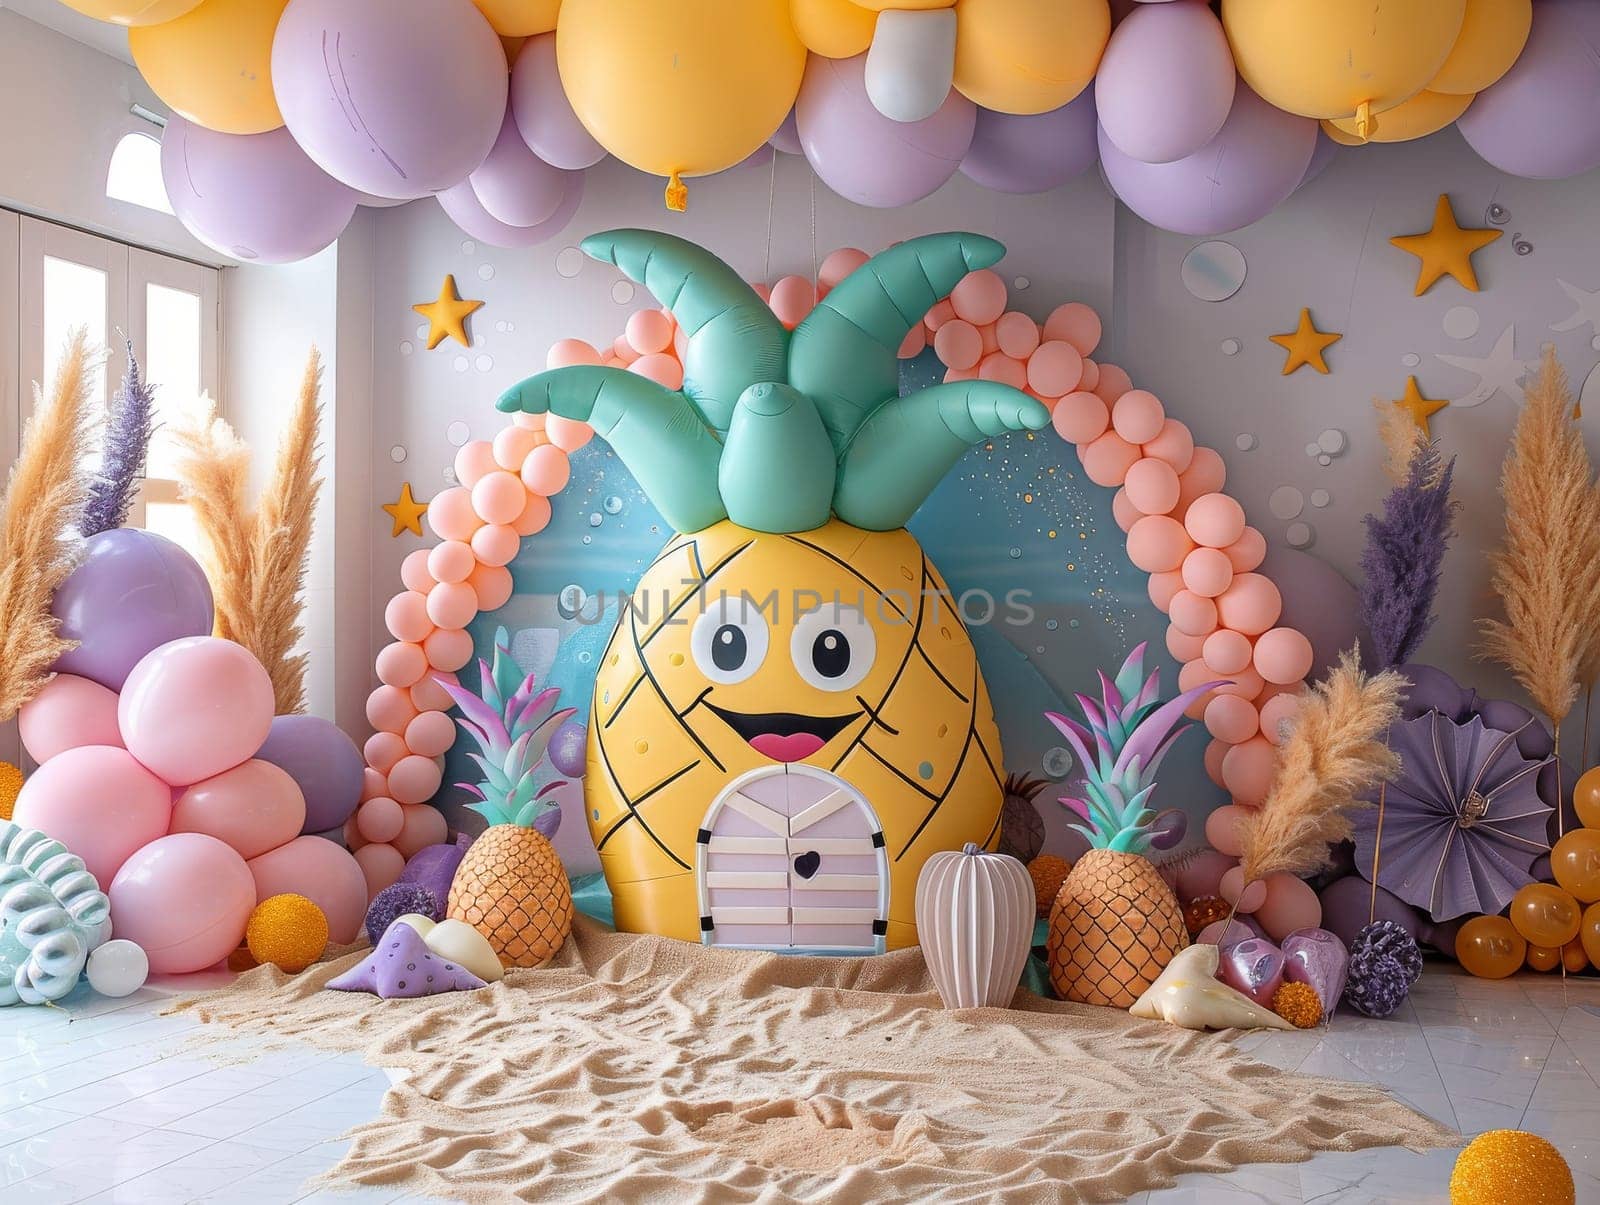 A room decorated with balloons and a pineapple cake. The room has a tropical theme with palm trees and a beach setting